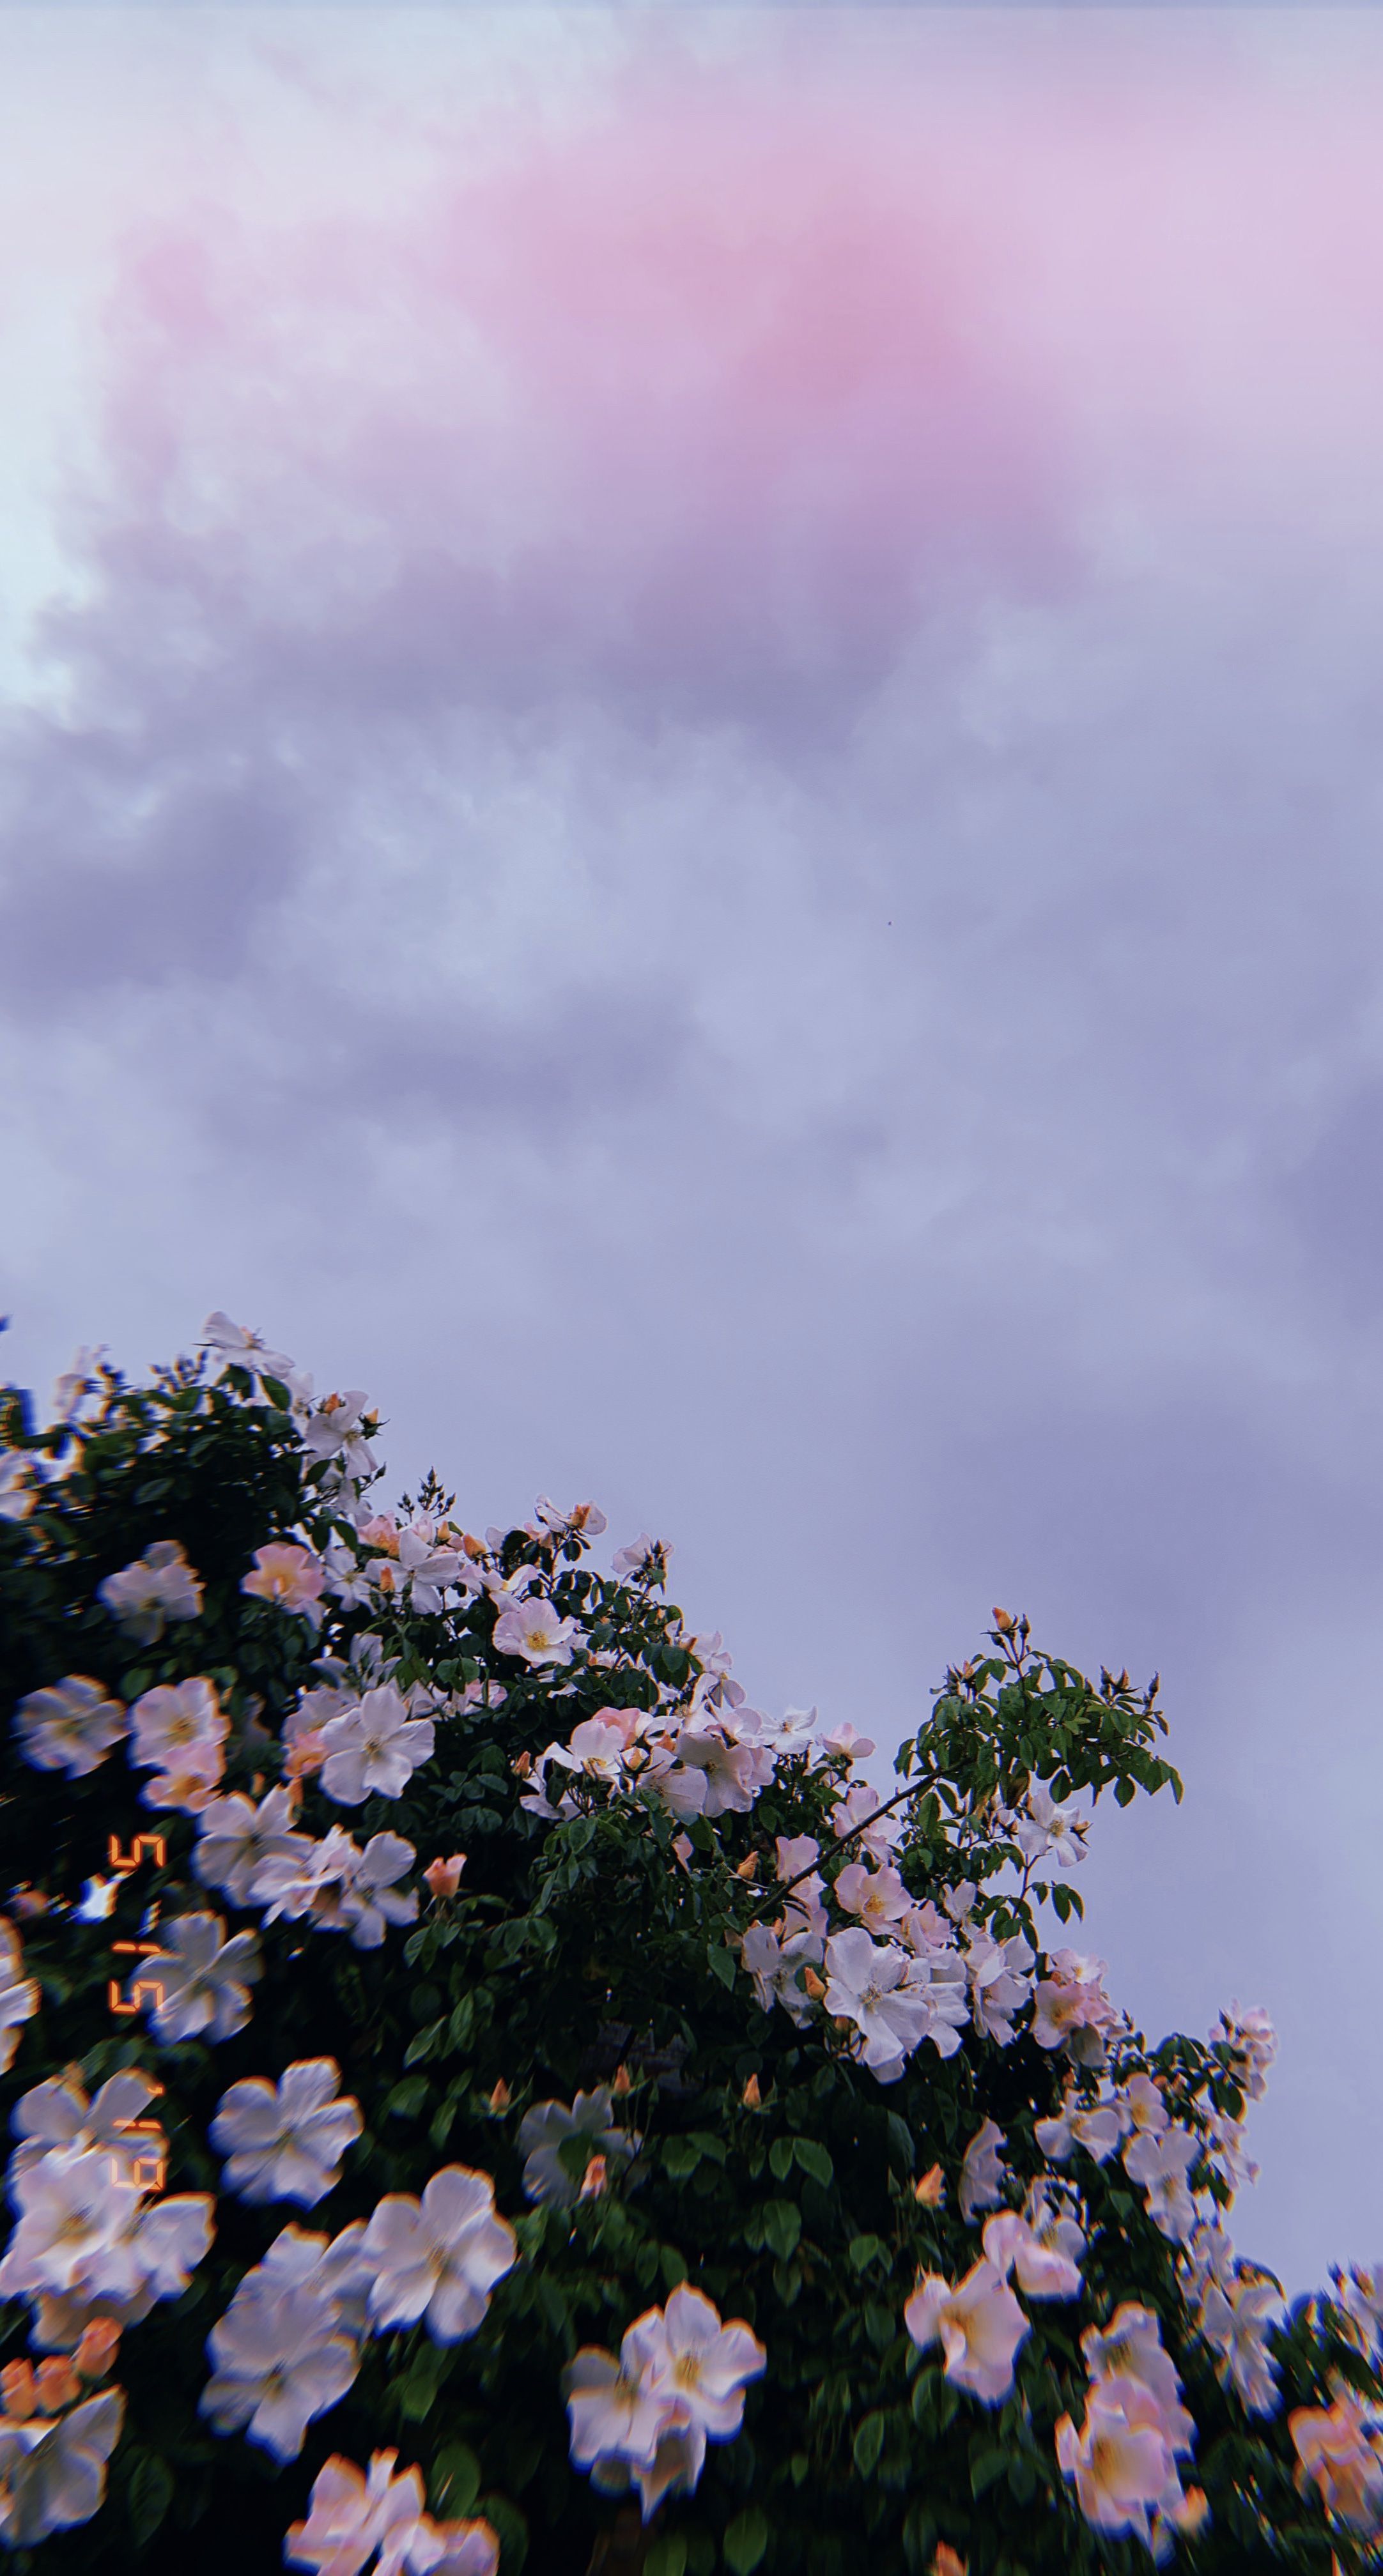 A bush with white flowers under a cloudy sky. - Beautiful, pretty